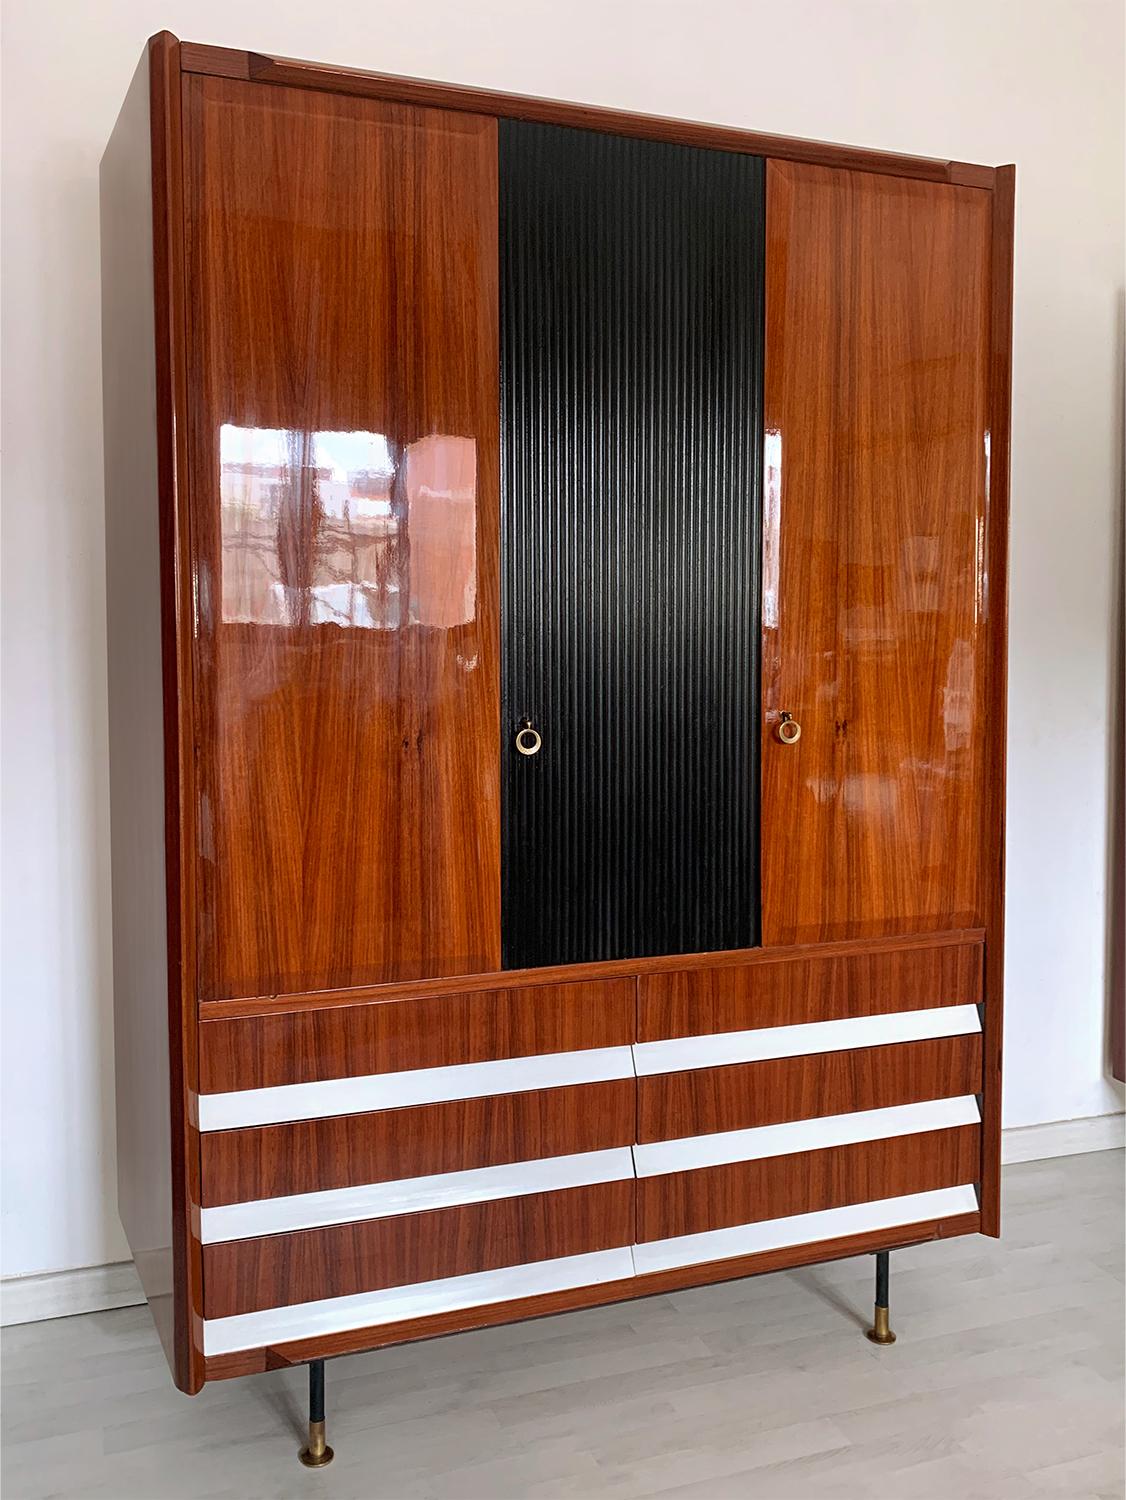 Stunning Italian Armoire 3-door and 6 drawers, well designed by Vittorio Dassi in the 1950s.

The cabinet is made of a beautiful lacquered teakwood, supported by black metal legs finished with adjustable brass feet.
The central ebonized door is